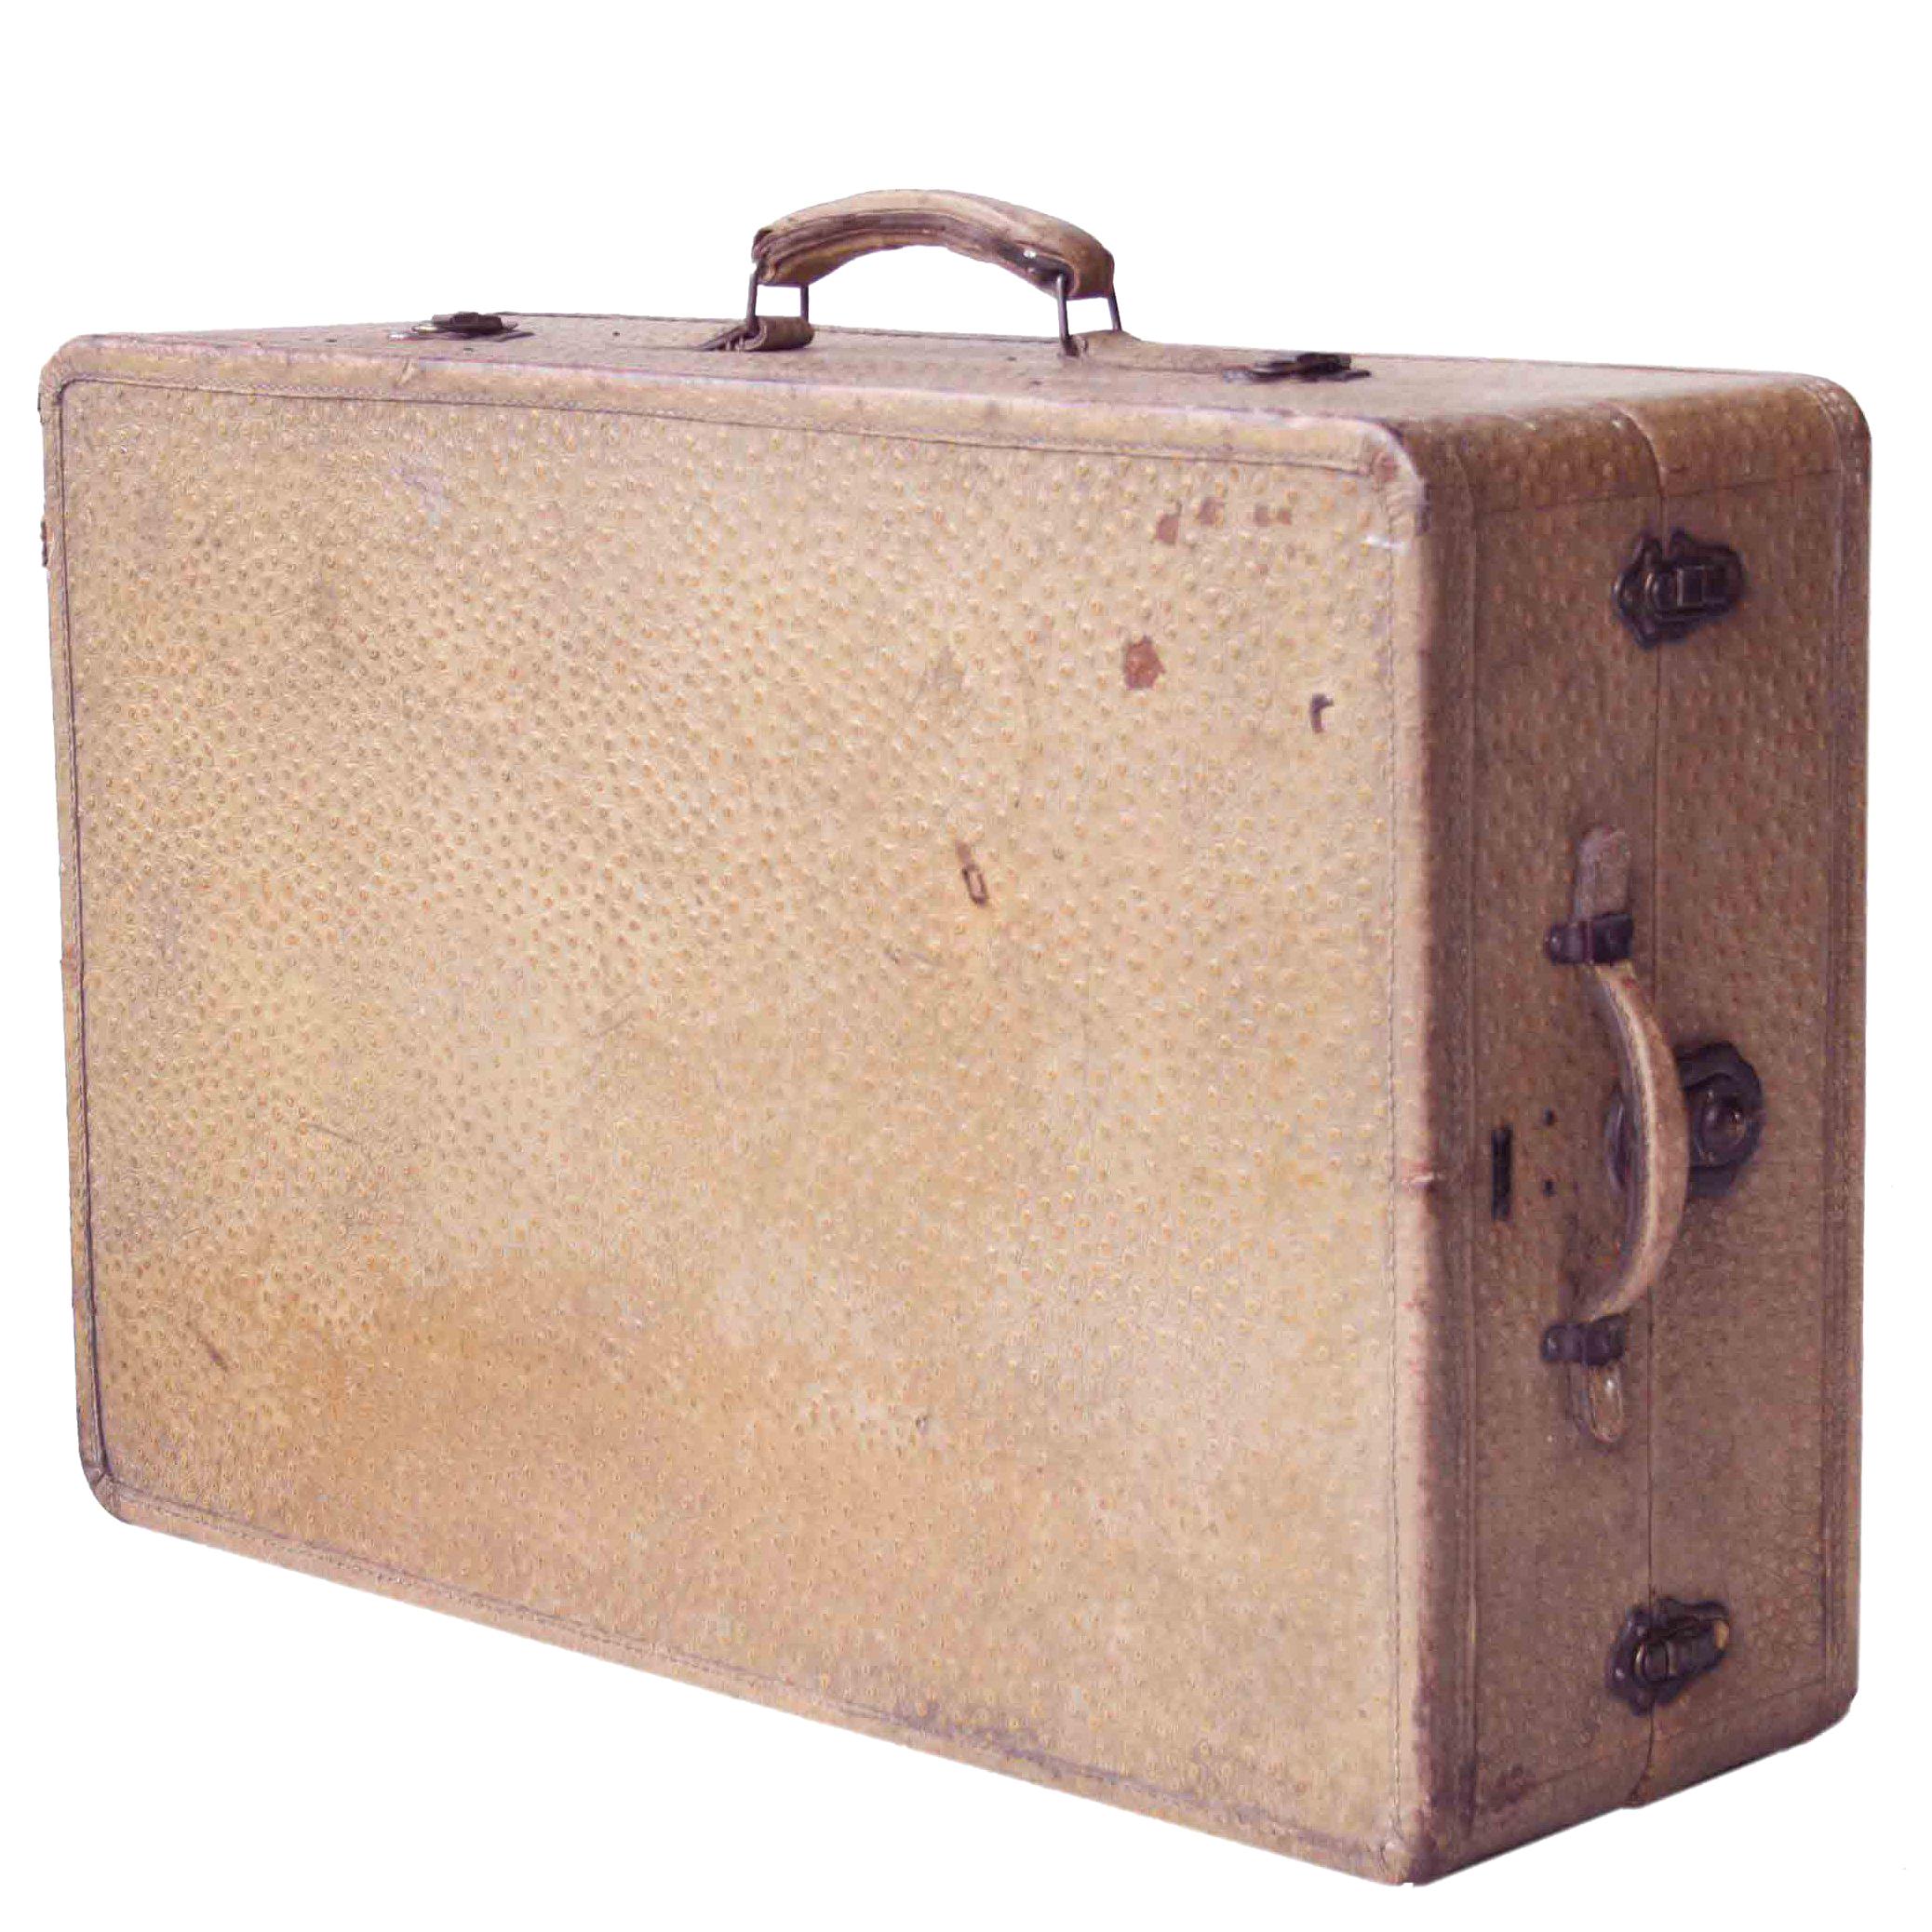 Midcentury Modern Beige Ostrich Type Leather Mexican Suitcase, Mexico, 1950